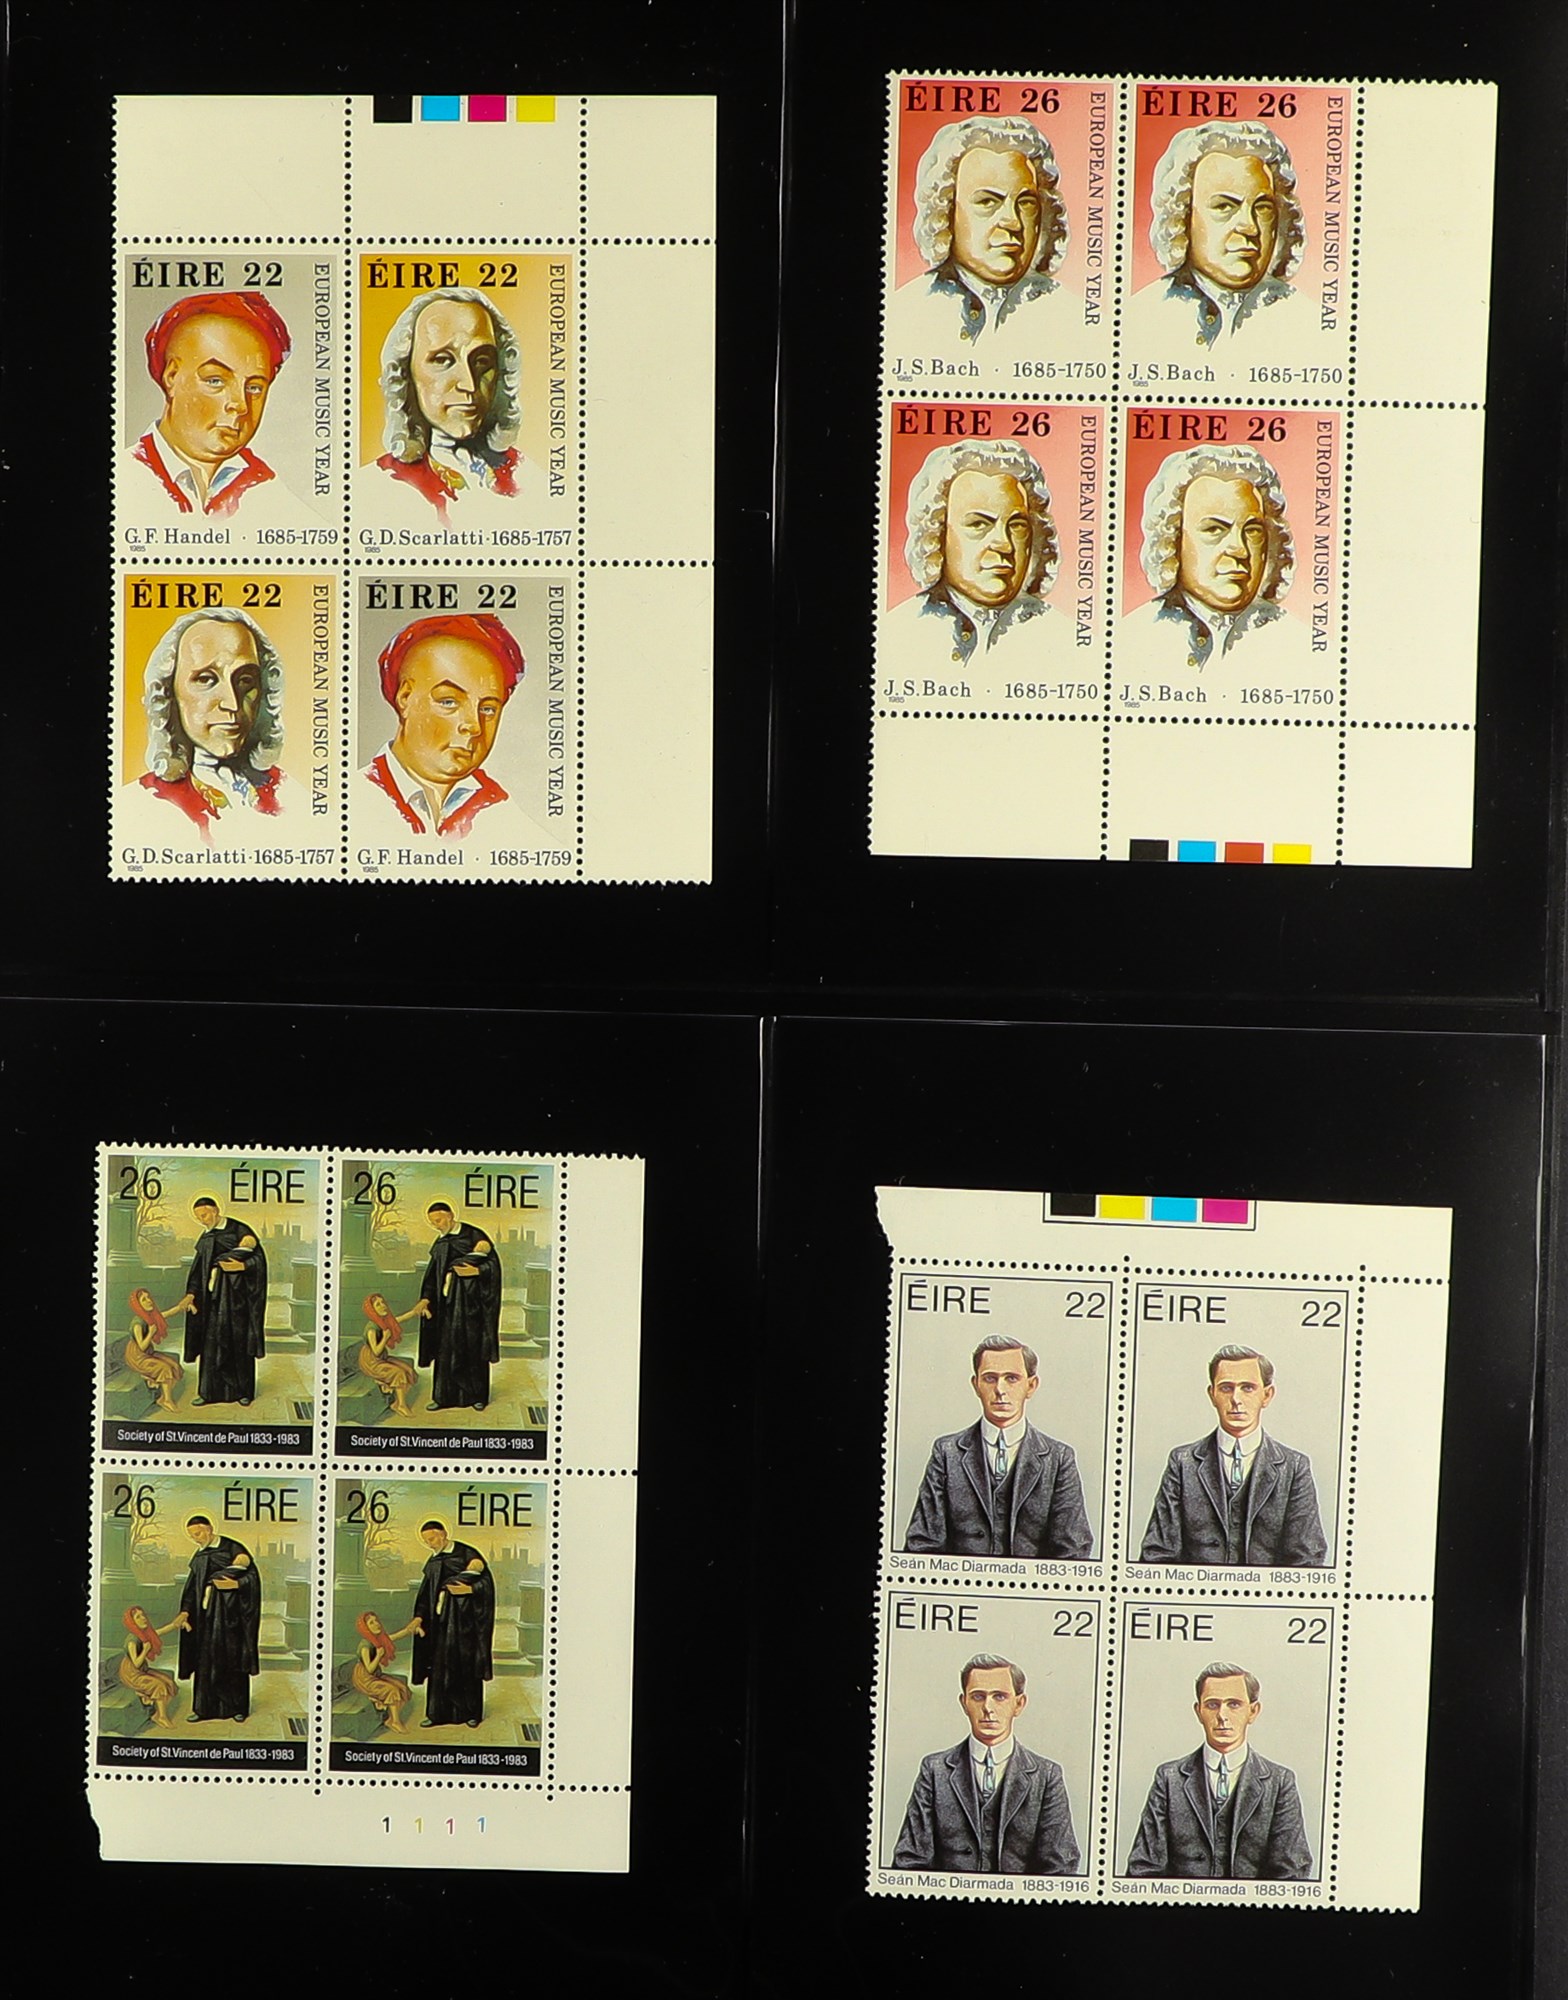 IRELAND 1984-1990 NEVER HINGED MINT COLLECTION of mostly blocks of 4 on stock pages in binder. - Image 4 of 8